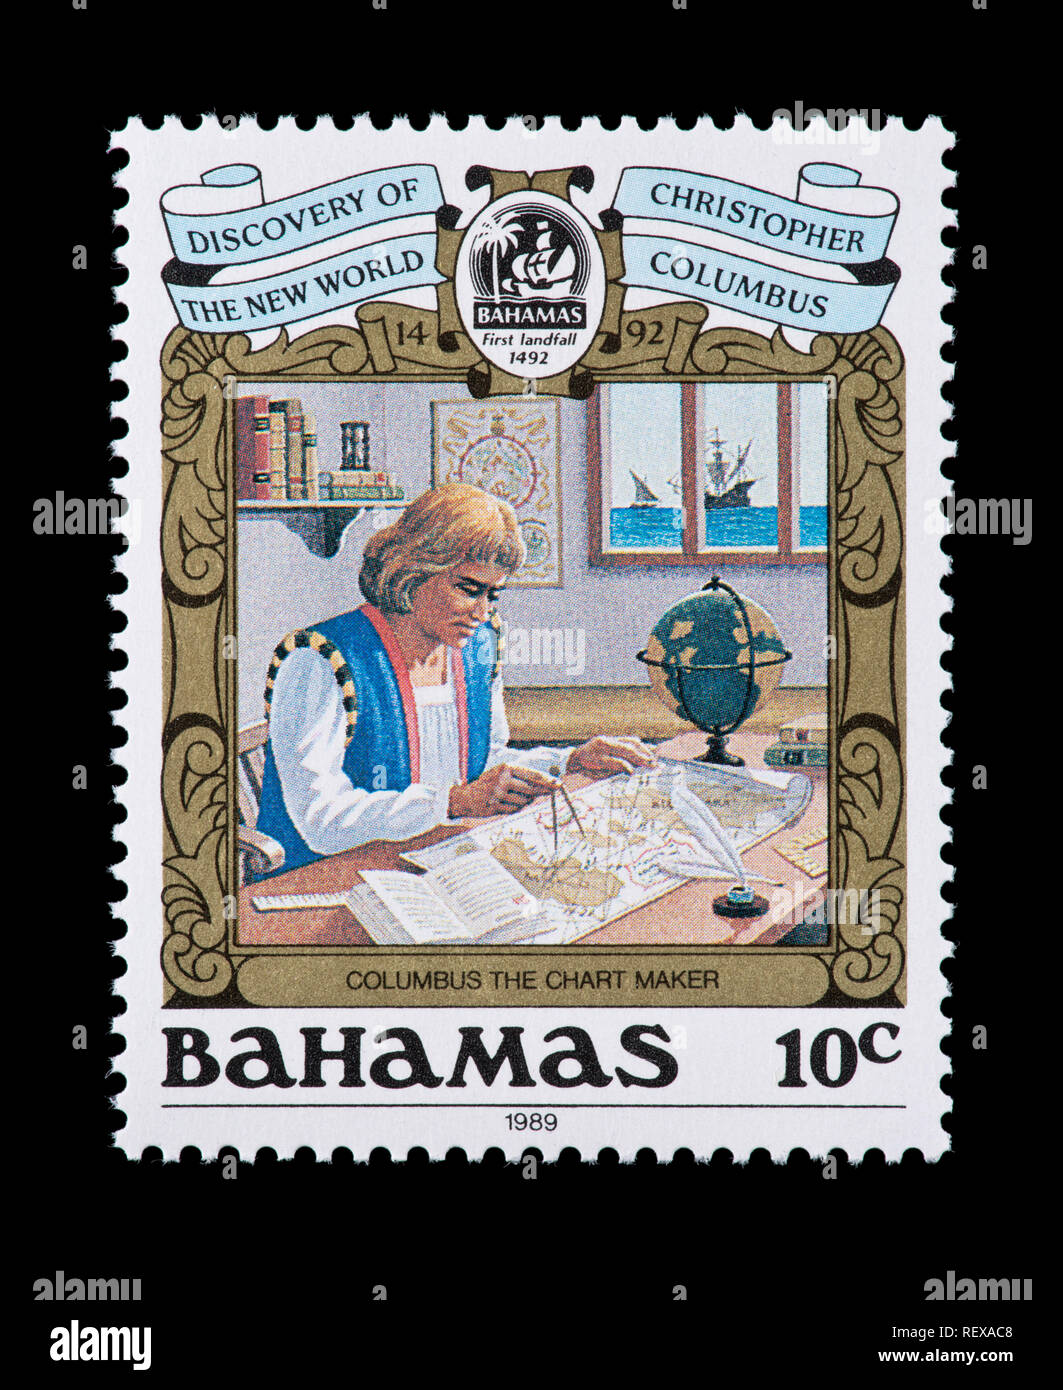 Postage stamp from Bahamas depicting Christopher Columbus as a mapmaker, 500th anniversary of the discovery of the Americas Stock Photo